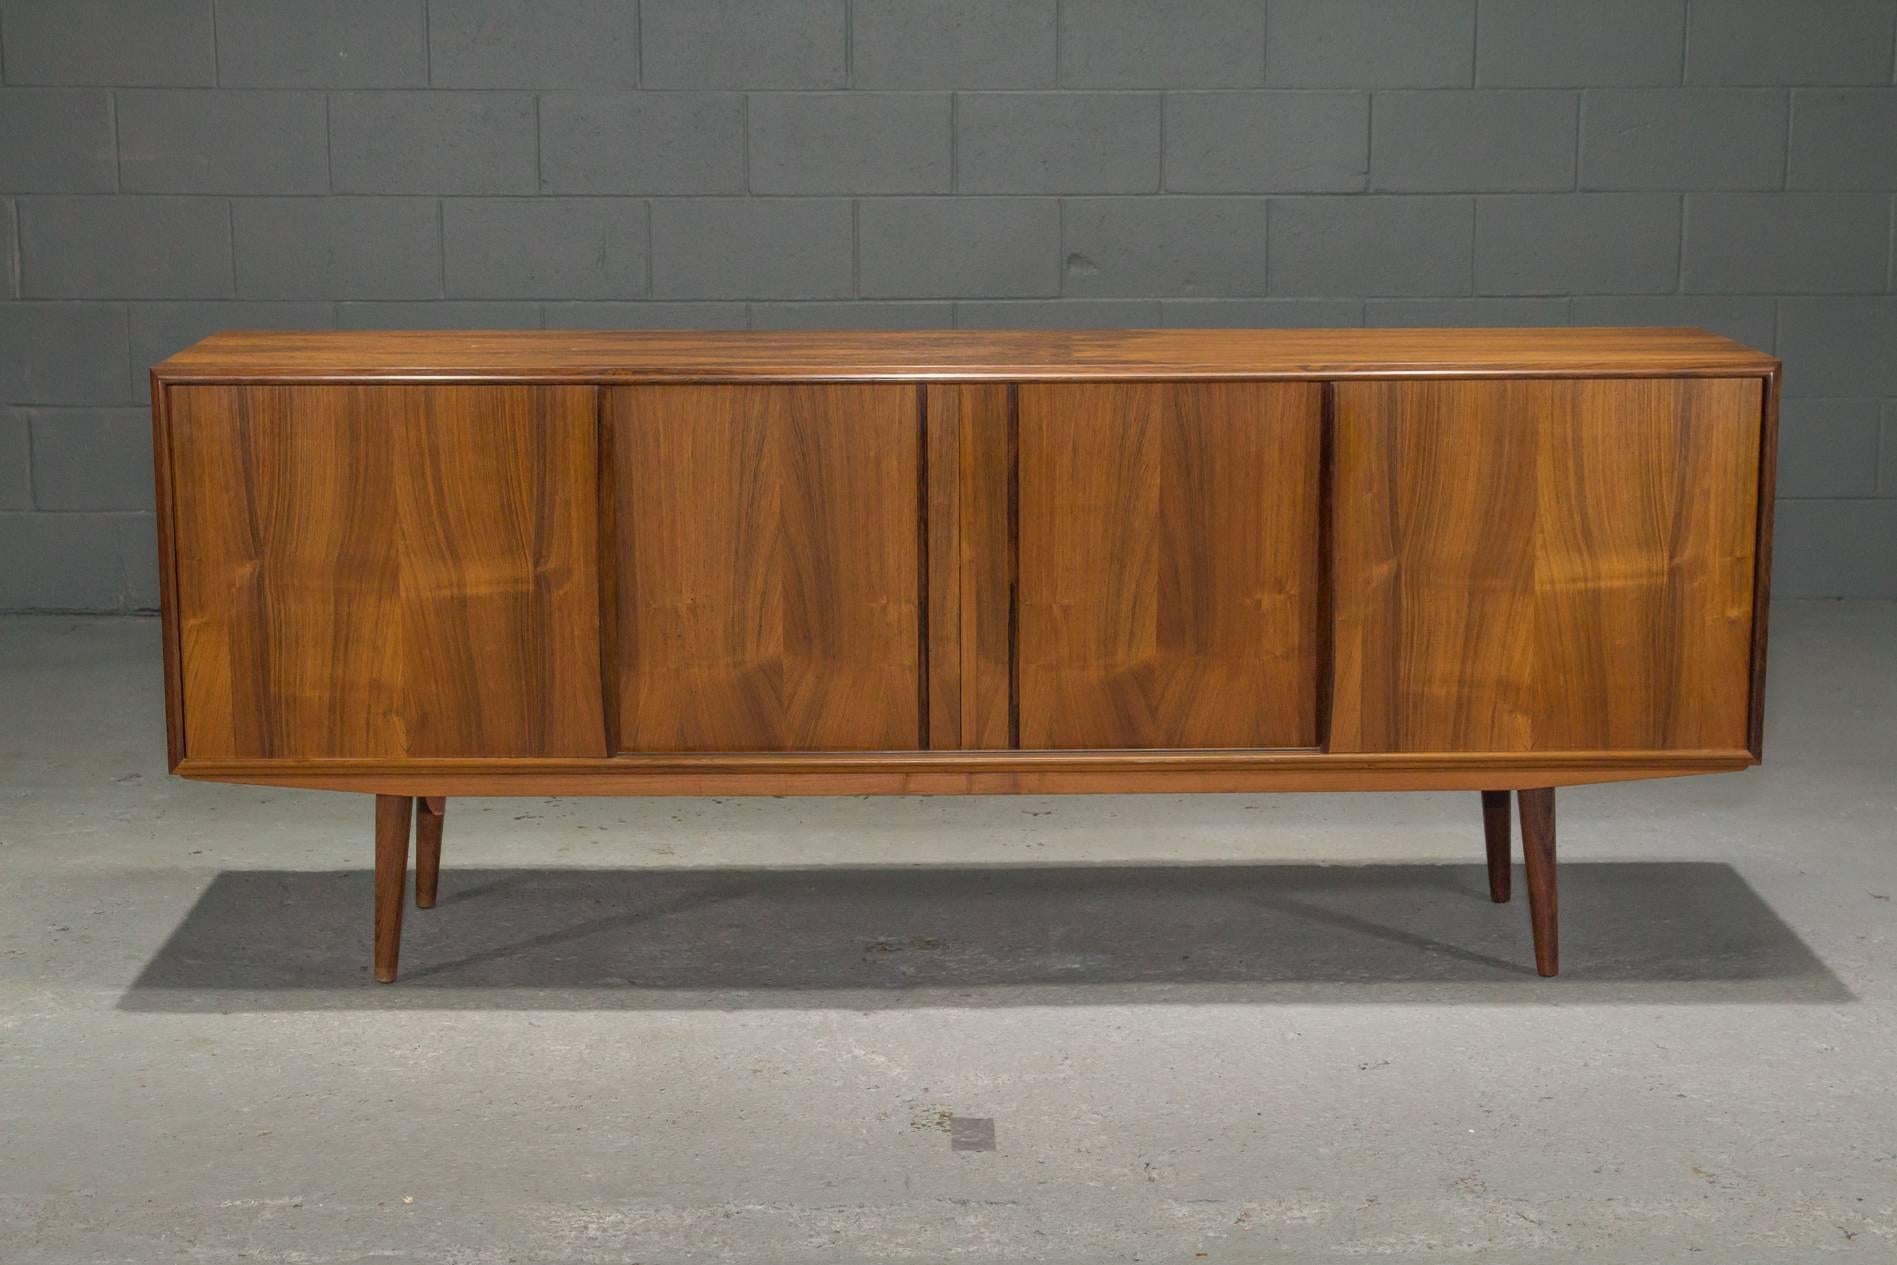 Danish modern midcentury rosewood sideboard. This sideboard features four sliding doors which open to reveal cutlery drawers on either side as well as an adjustable shelf on one side, and a larger adjustable shelf in the middle.